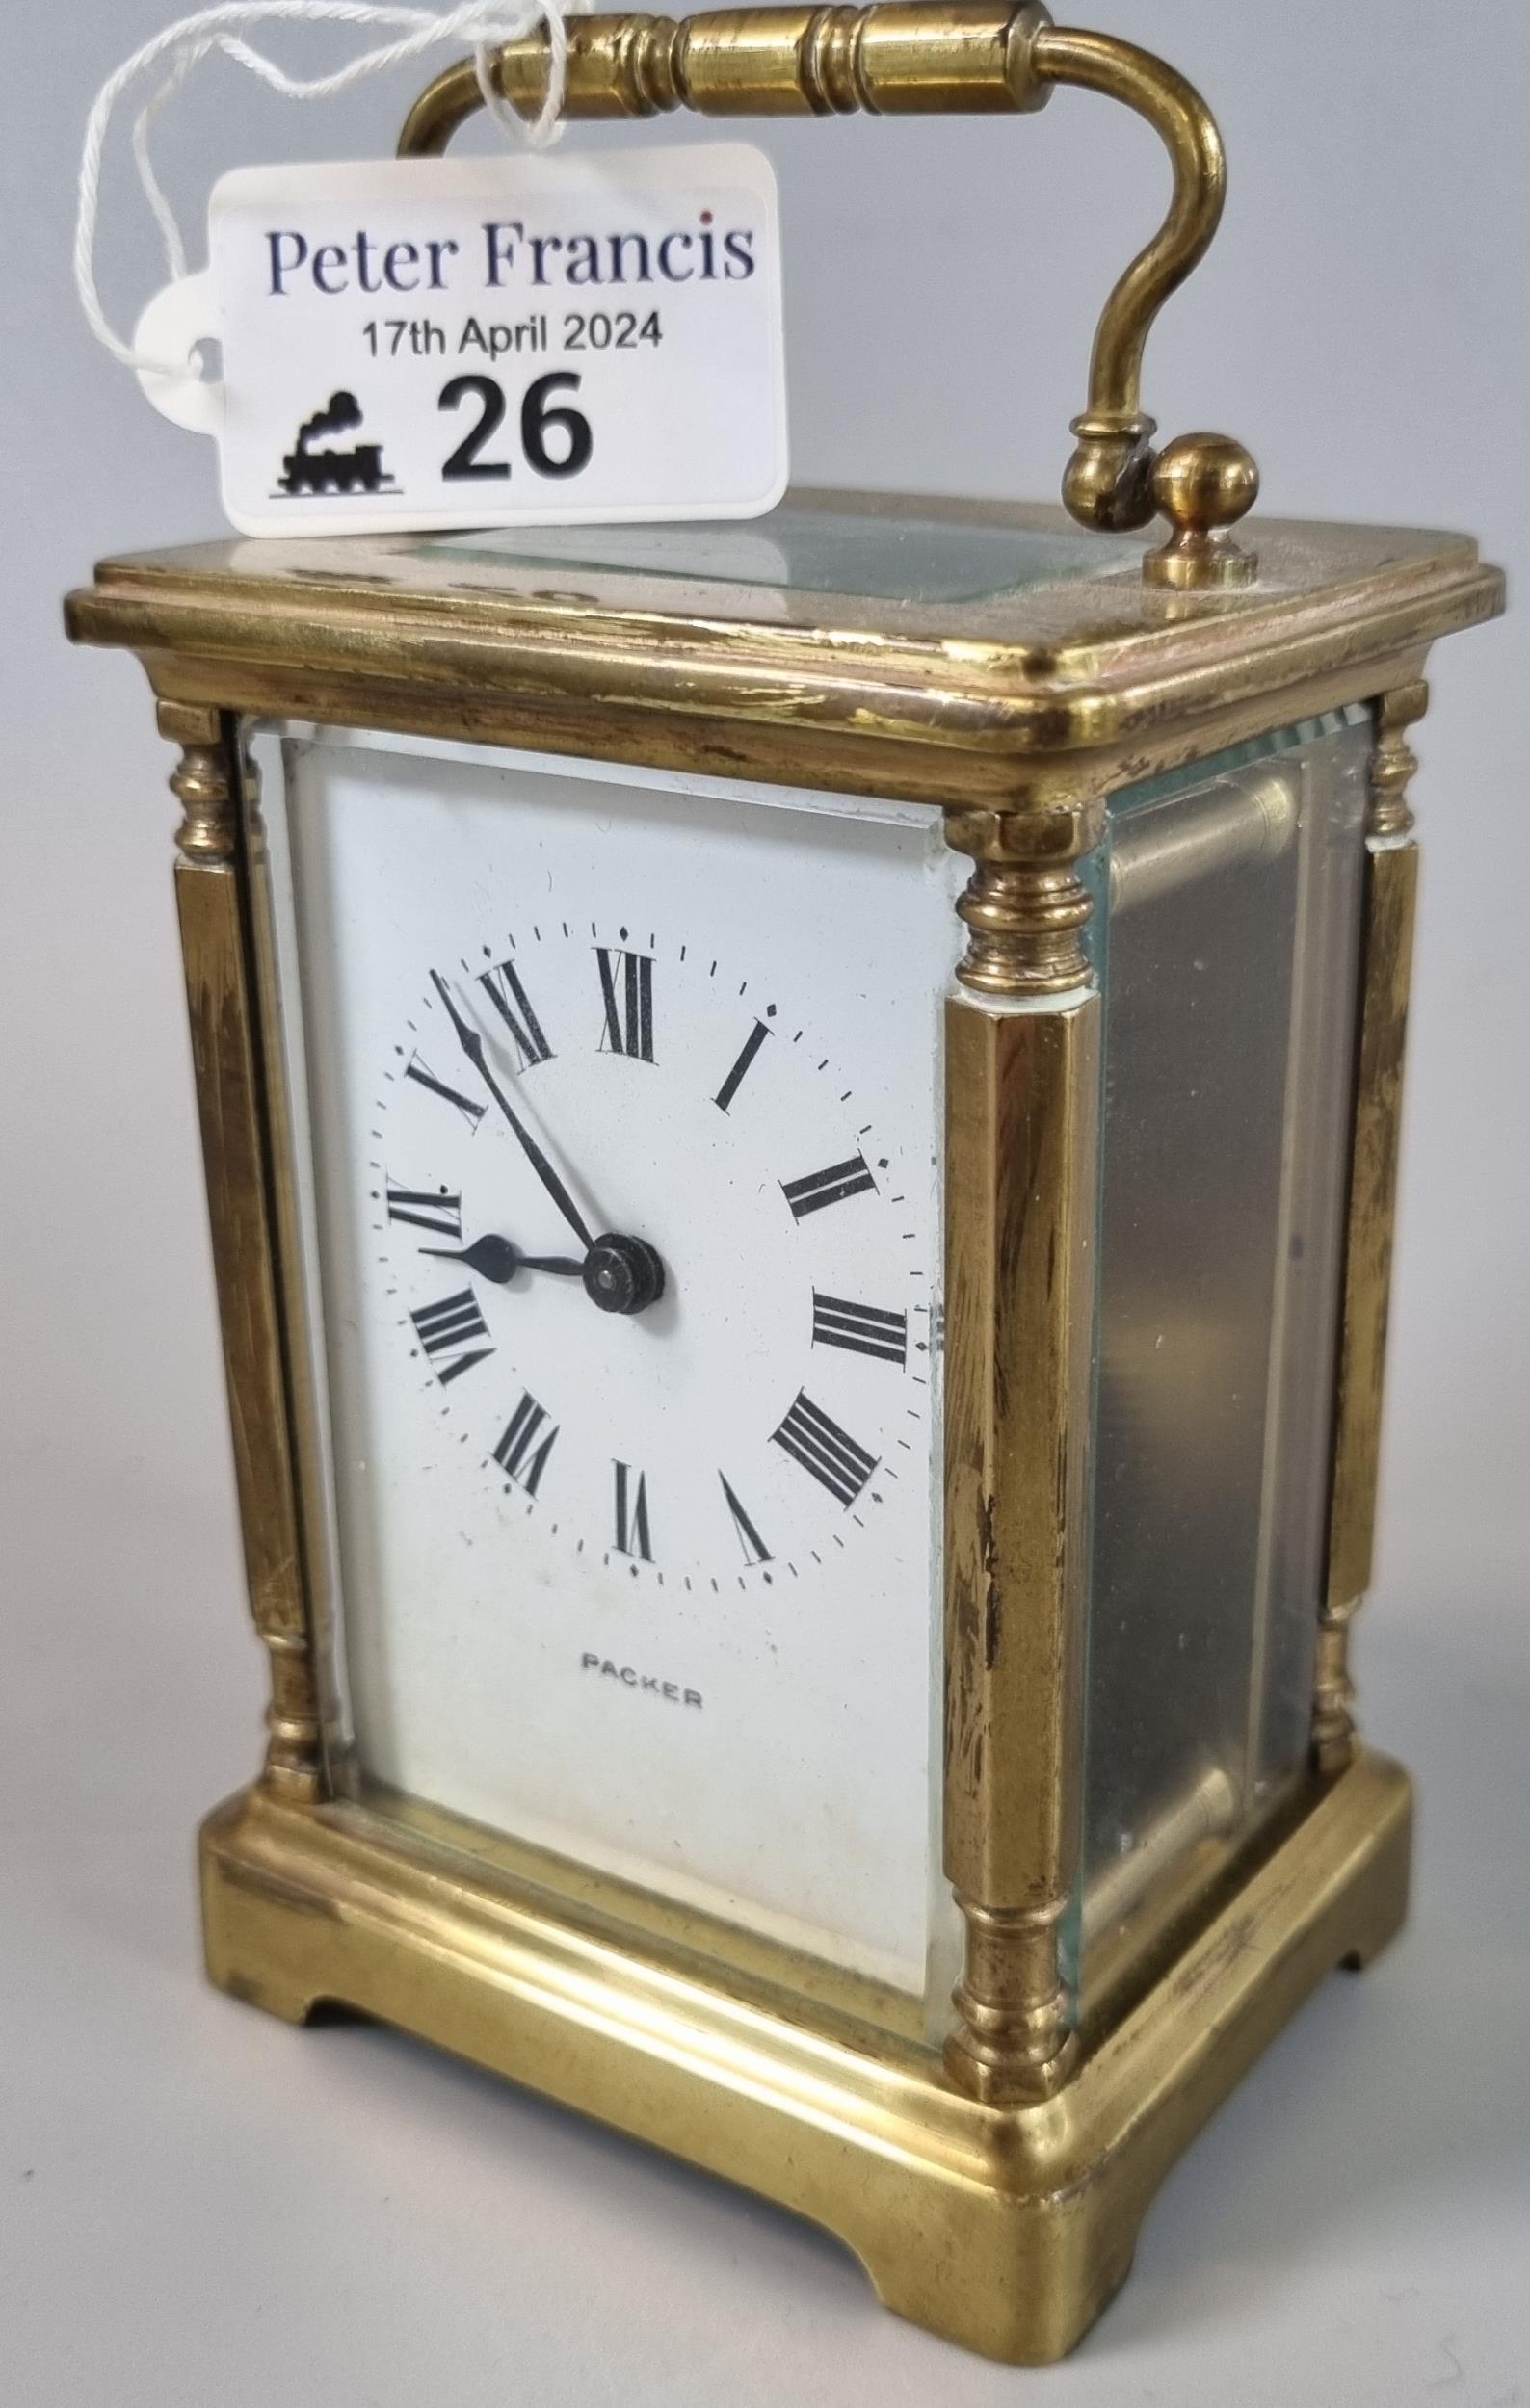 Brass carriage clock with Roman numeral face, marked 'Packer'. With key. (B.P. 21% + VAT)